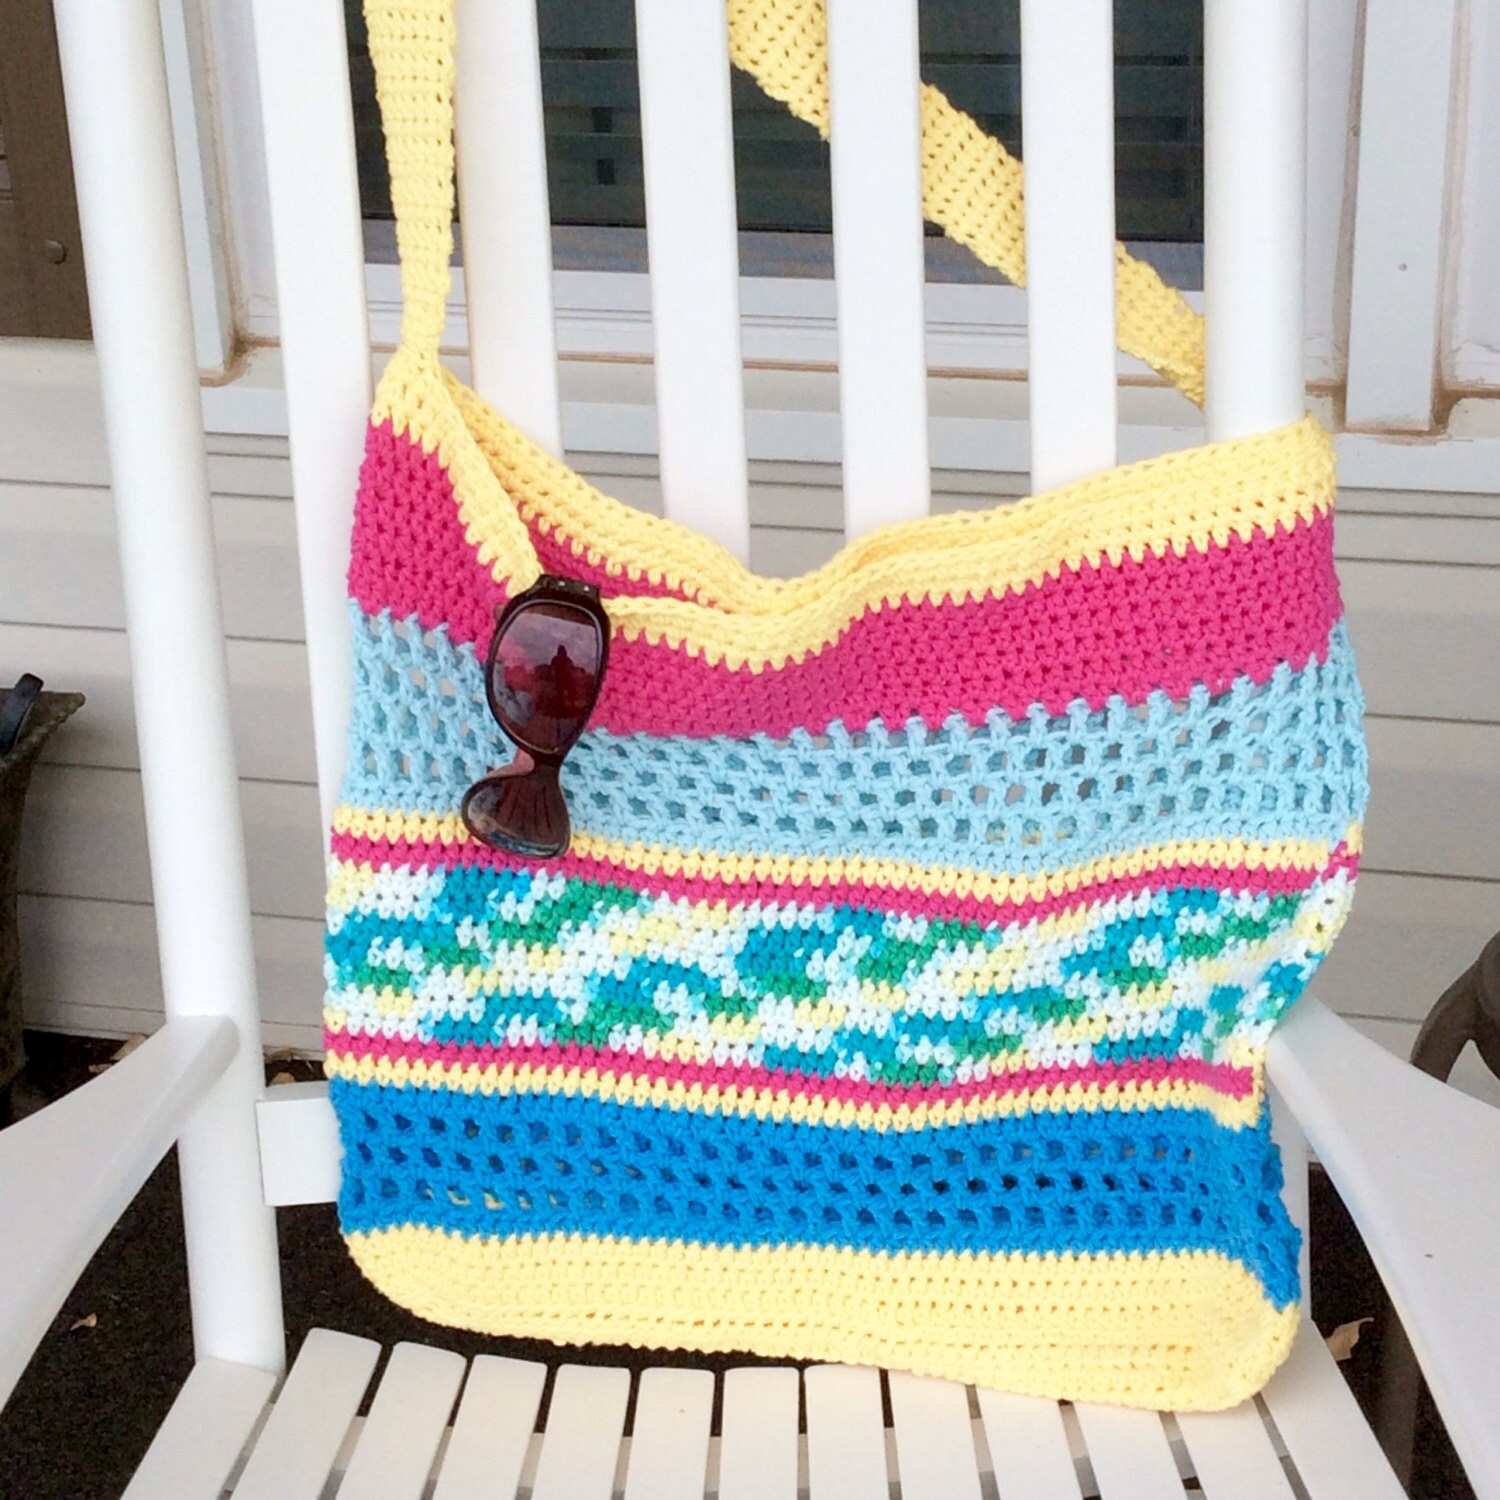 Colorful Crochet Cotton Beach Bag with Long Shoulder or Cross